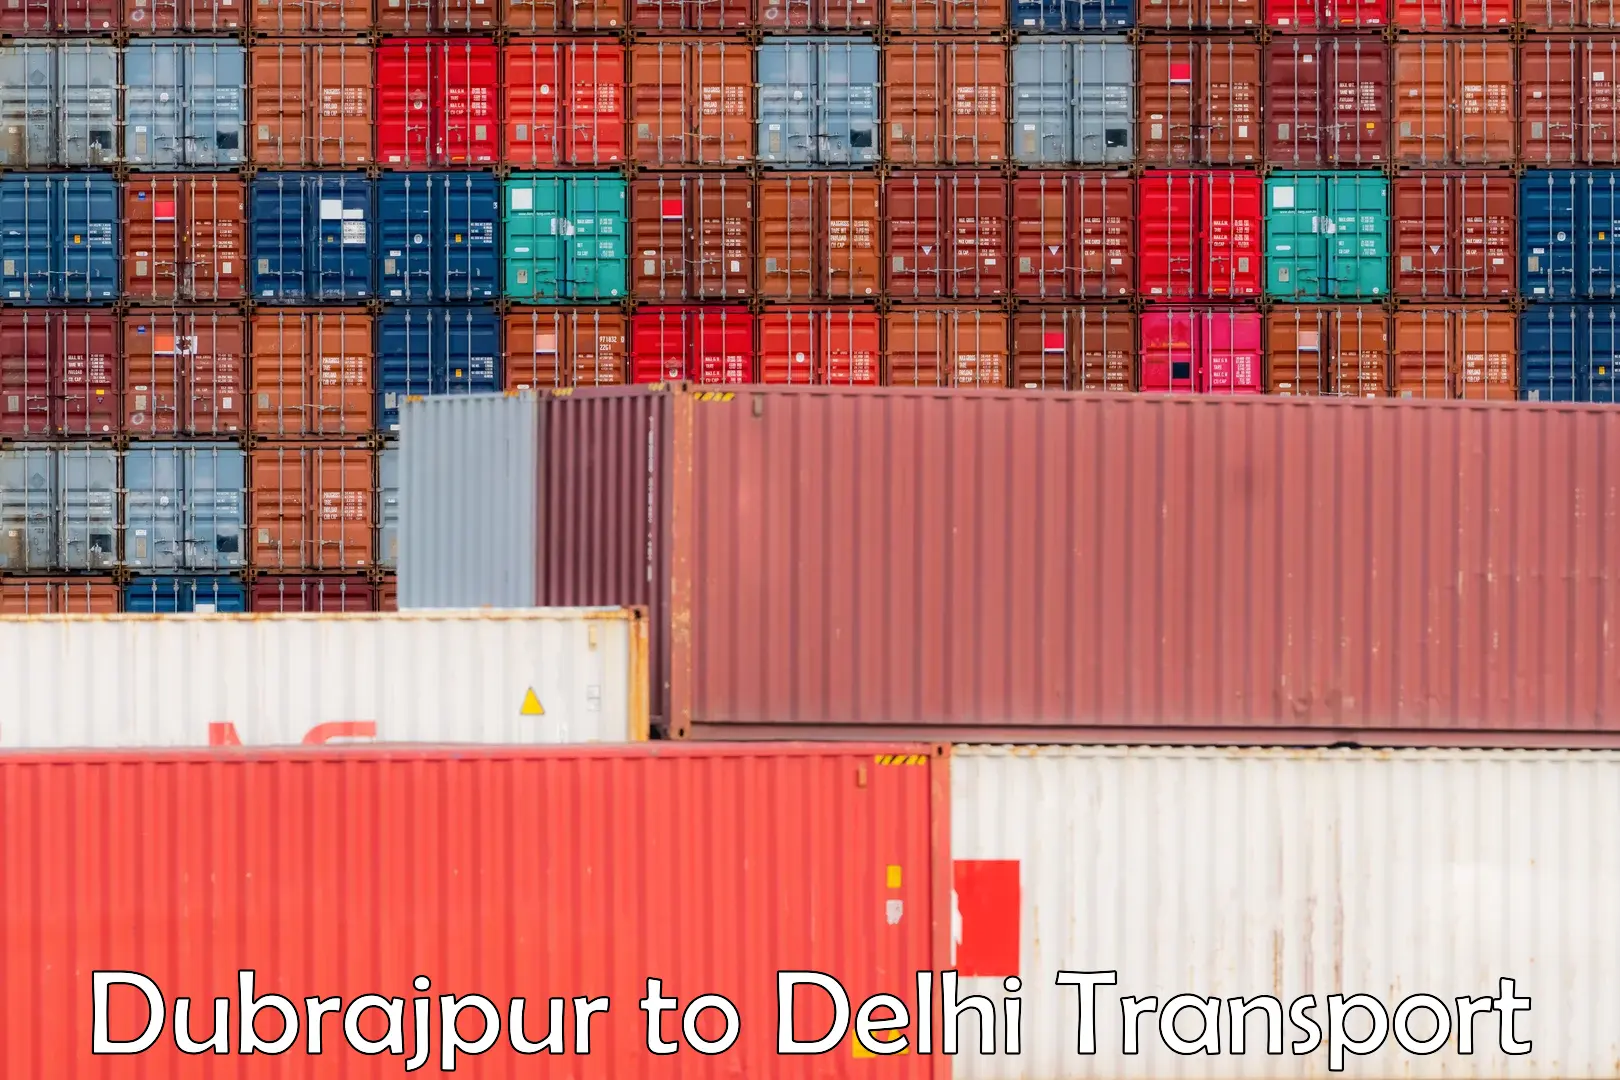 Truck transport companies in India Dubrajpur to NCR